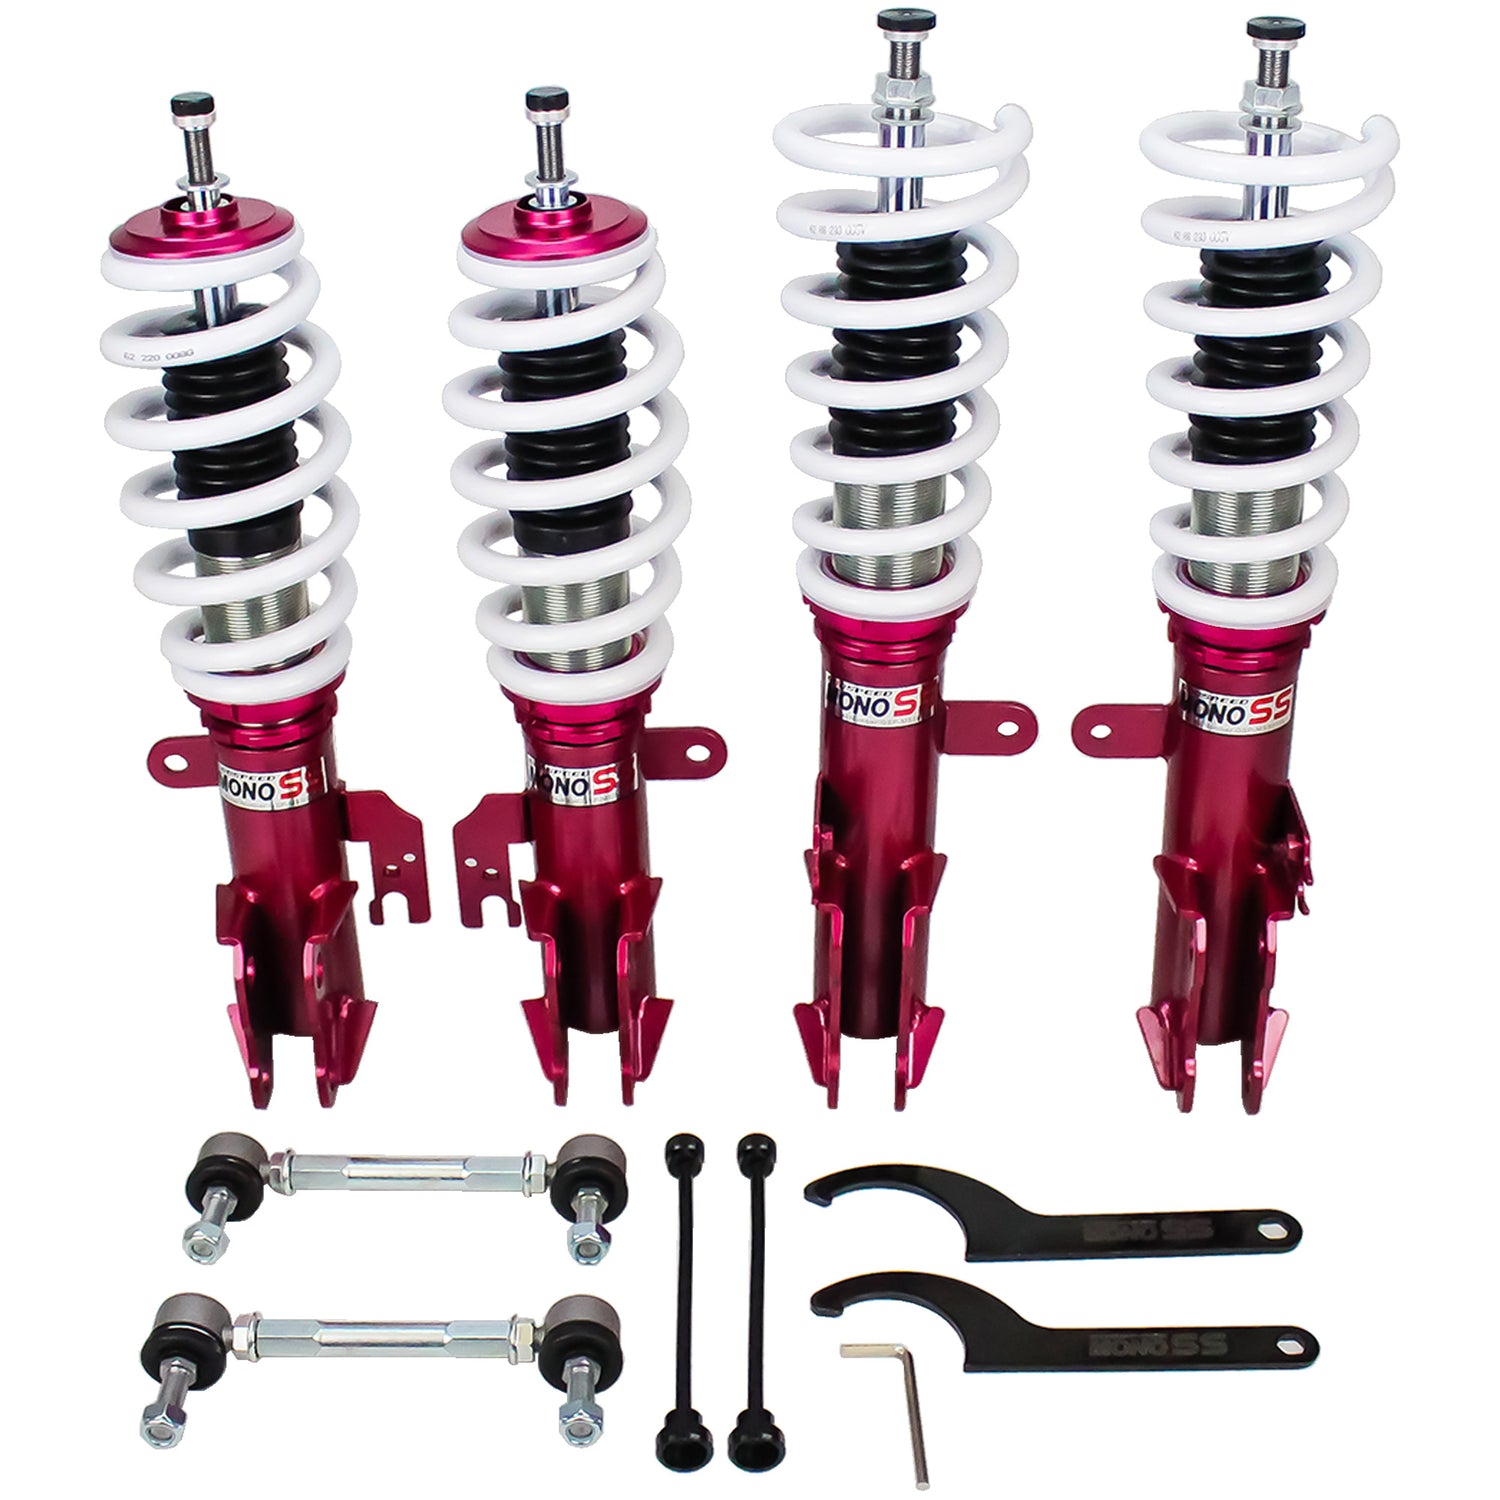 Godspeed MSS0116 MonoSS Coilover Lowering Kit, Fully Adjustable, Ride Height, Spring Tension And 16 Click Damping, Toyota Highlander(XU40) FWD 2008-13